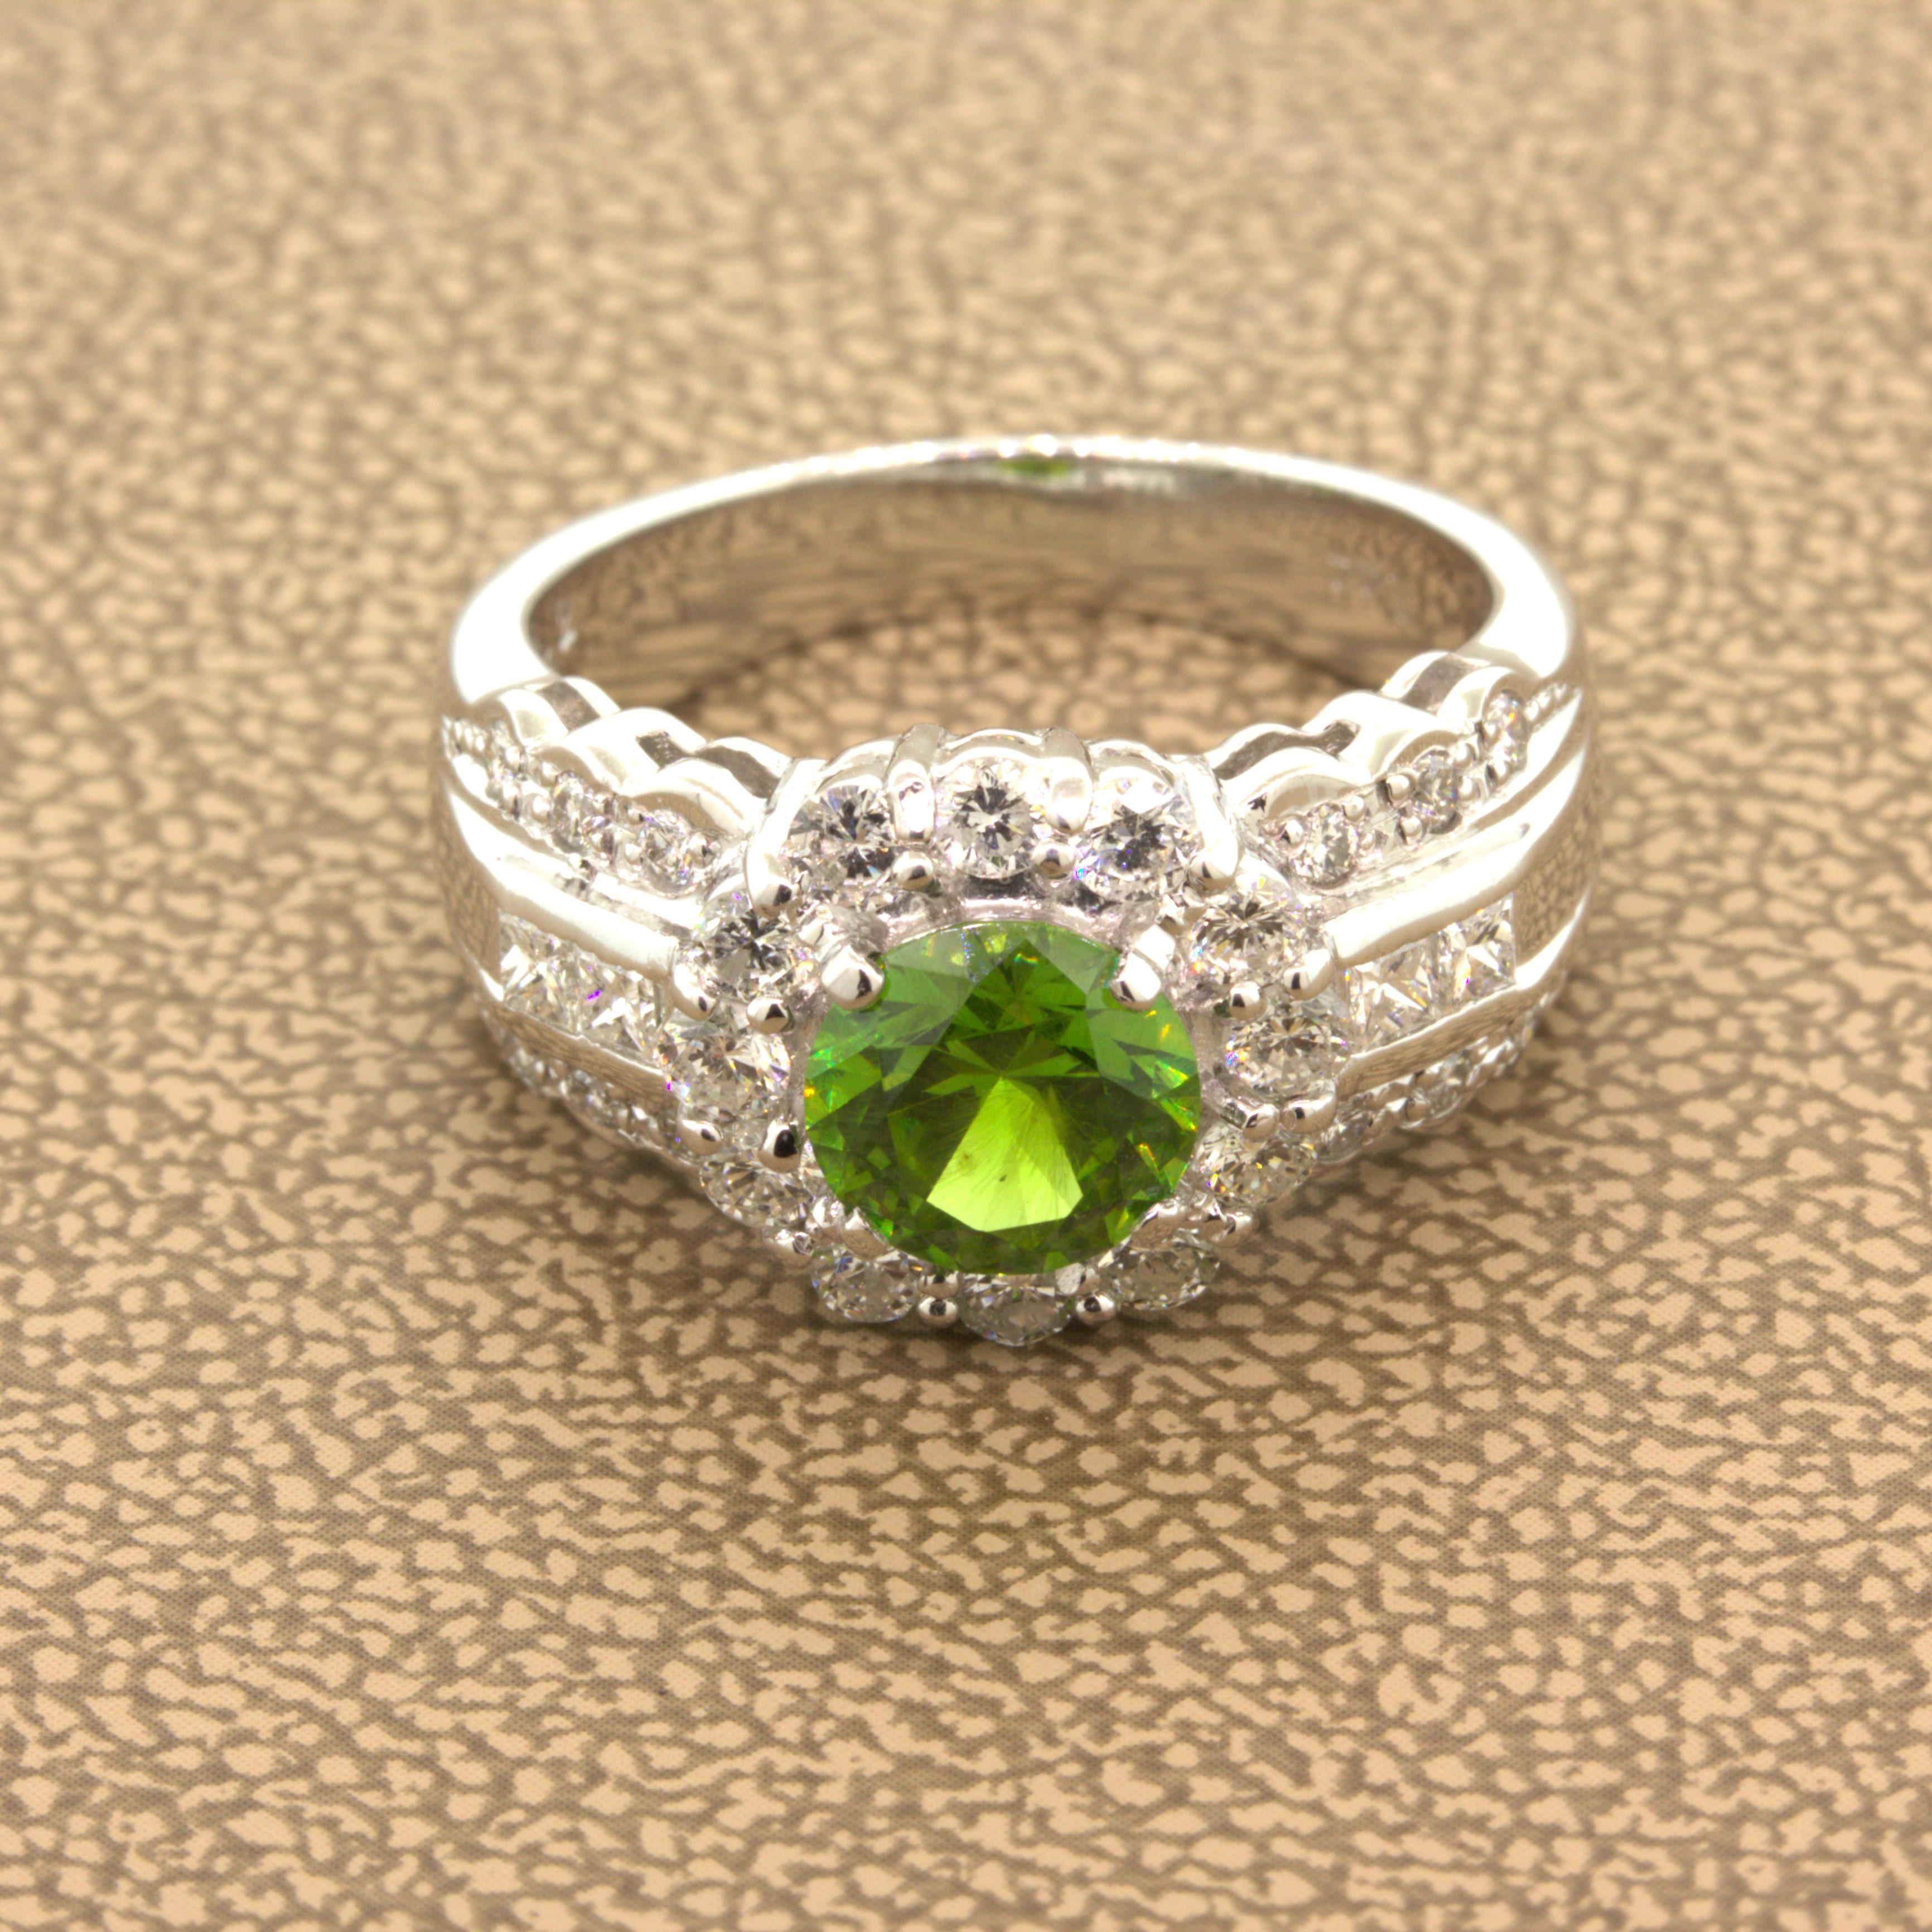 A very rare and beautiful natural gemstone takes center stage. It is a vibrant demantoid garnet from the Ural Mountains in Russia. It weighs 1.44 carats which is very large for stones like this with strong bright green color and immense brilliance